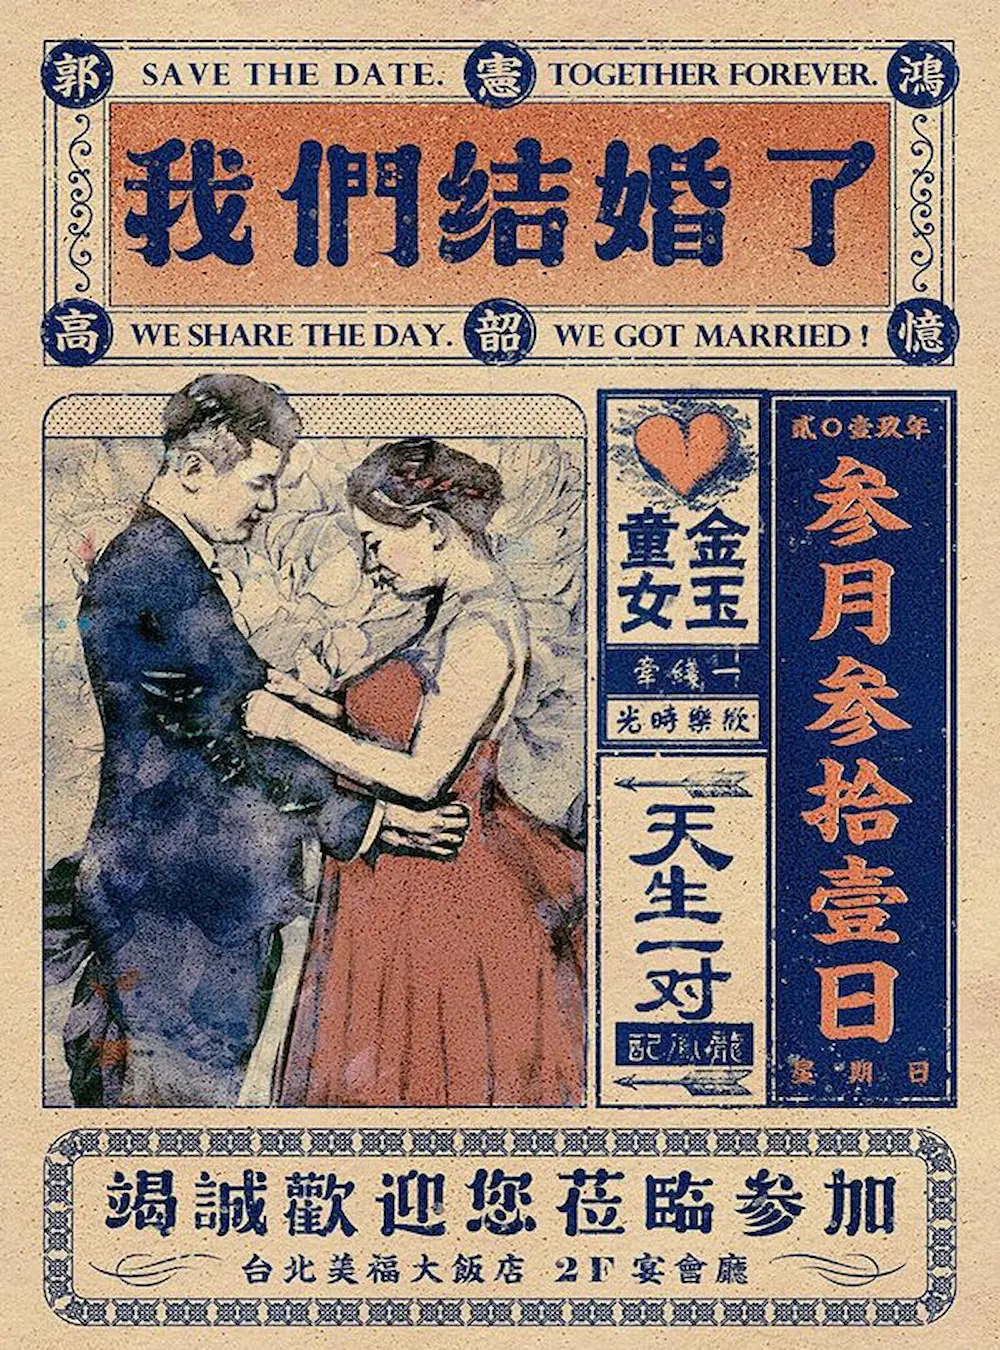 Vintage Chinese poster of a couple getting married 